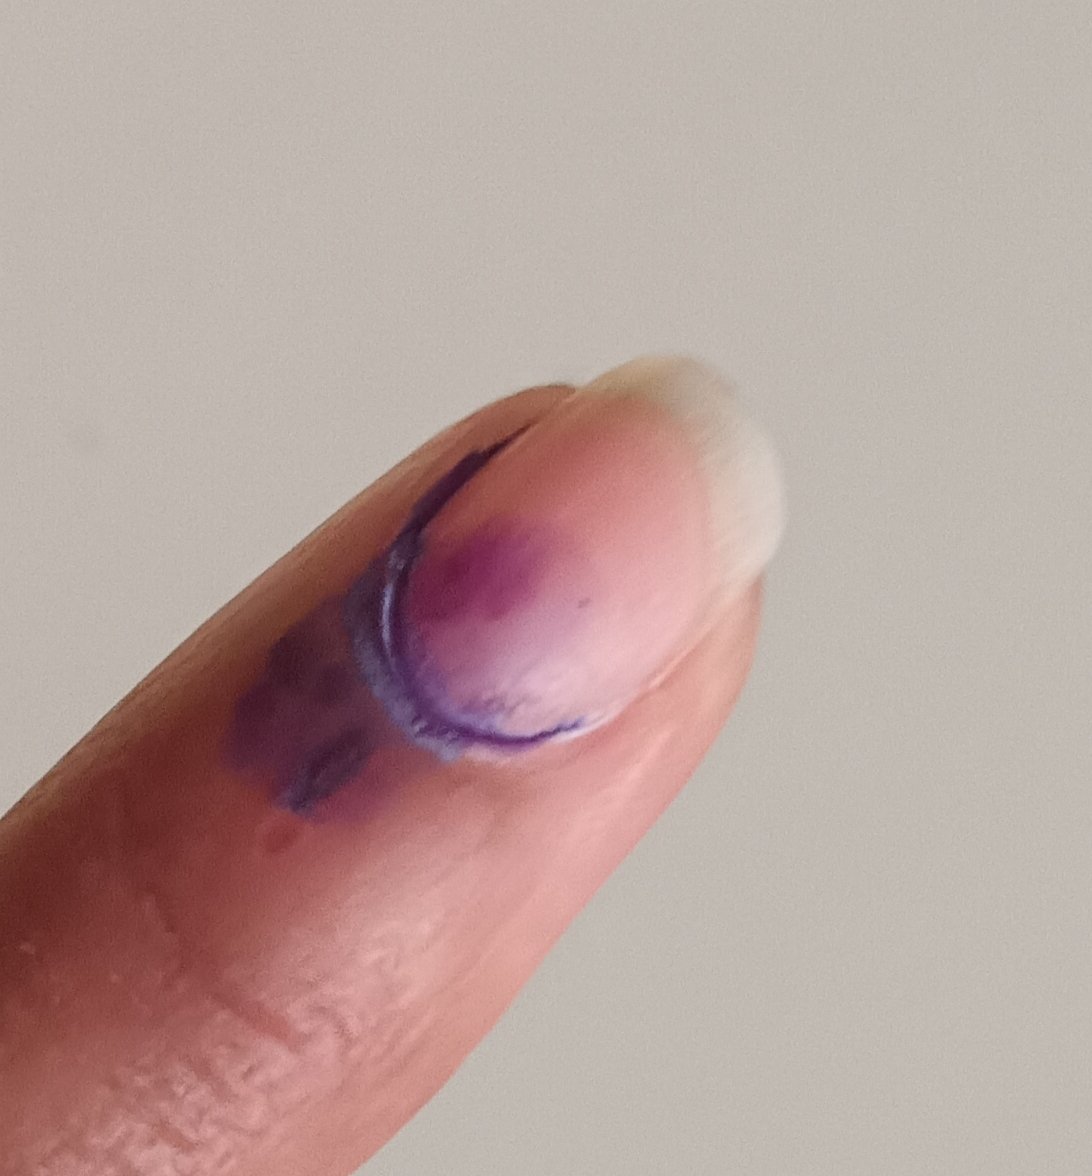 I utilised section 326.
did you?
#Vote
#LokSabhaElection2024

The year 2024 is an election year across the
world. 
#electionYear
At least 64 countries, both developed and developing, accounting for 49% of world
population, will go to the polls.
#Elections2024